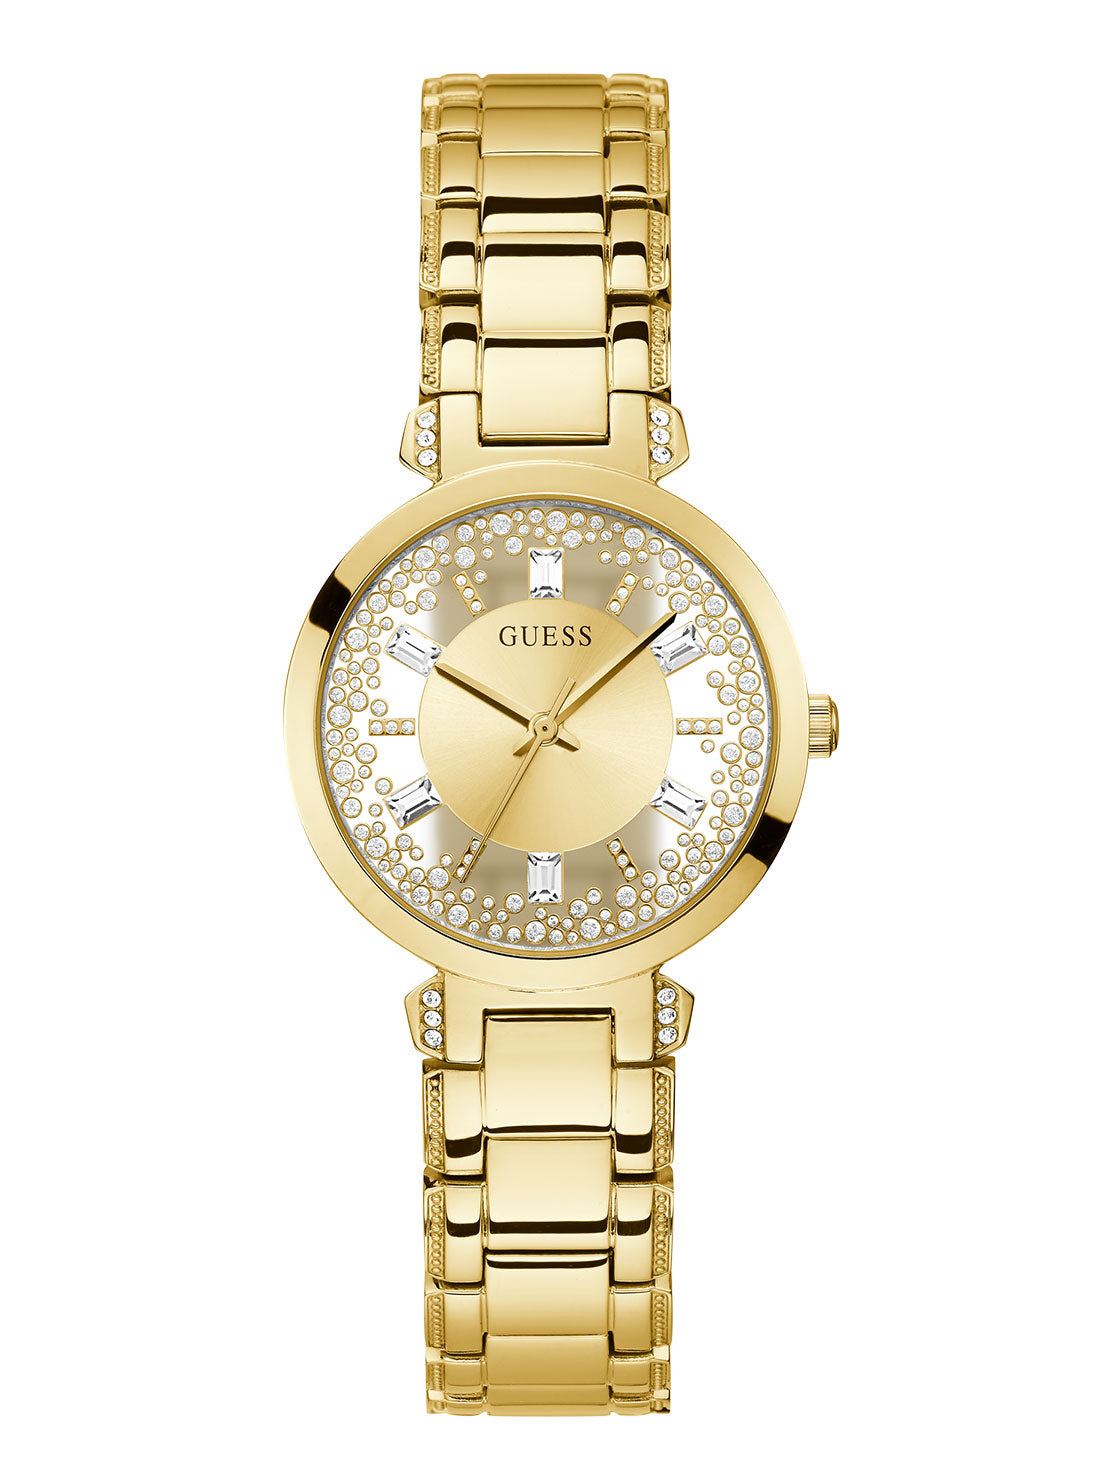 GUESS Women's Champagne Crystal Clear Glitz Watch GW0470L2 Front View